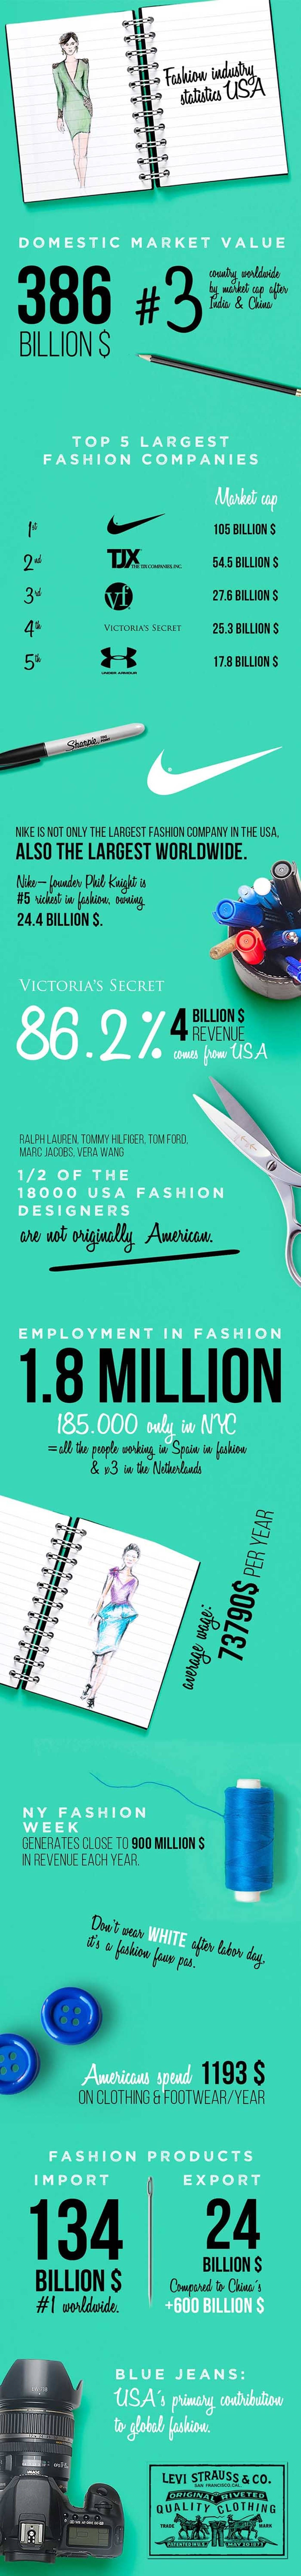 Fashion industry statistics infographics part 1: the USA